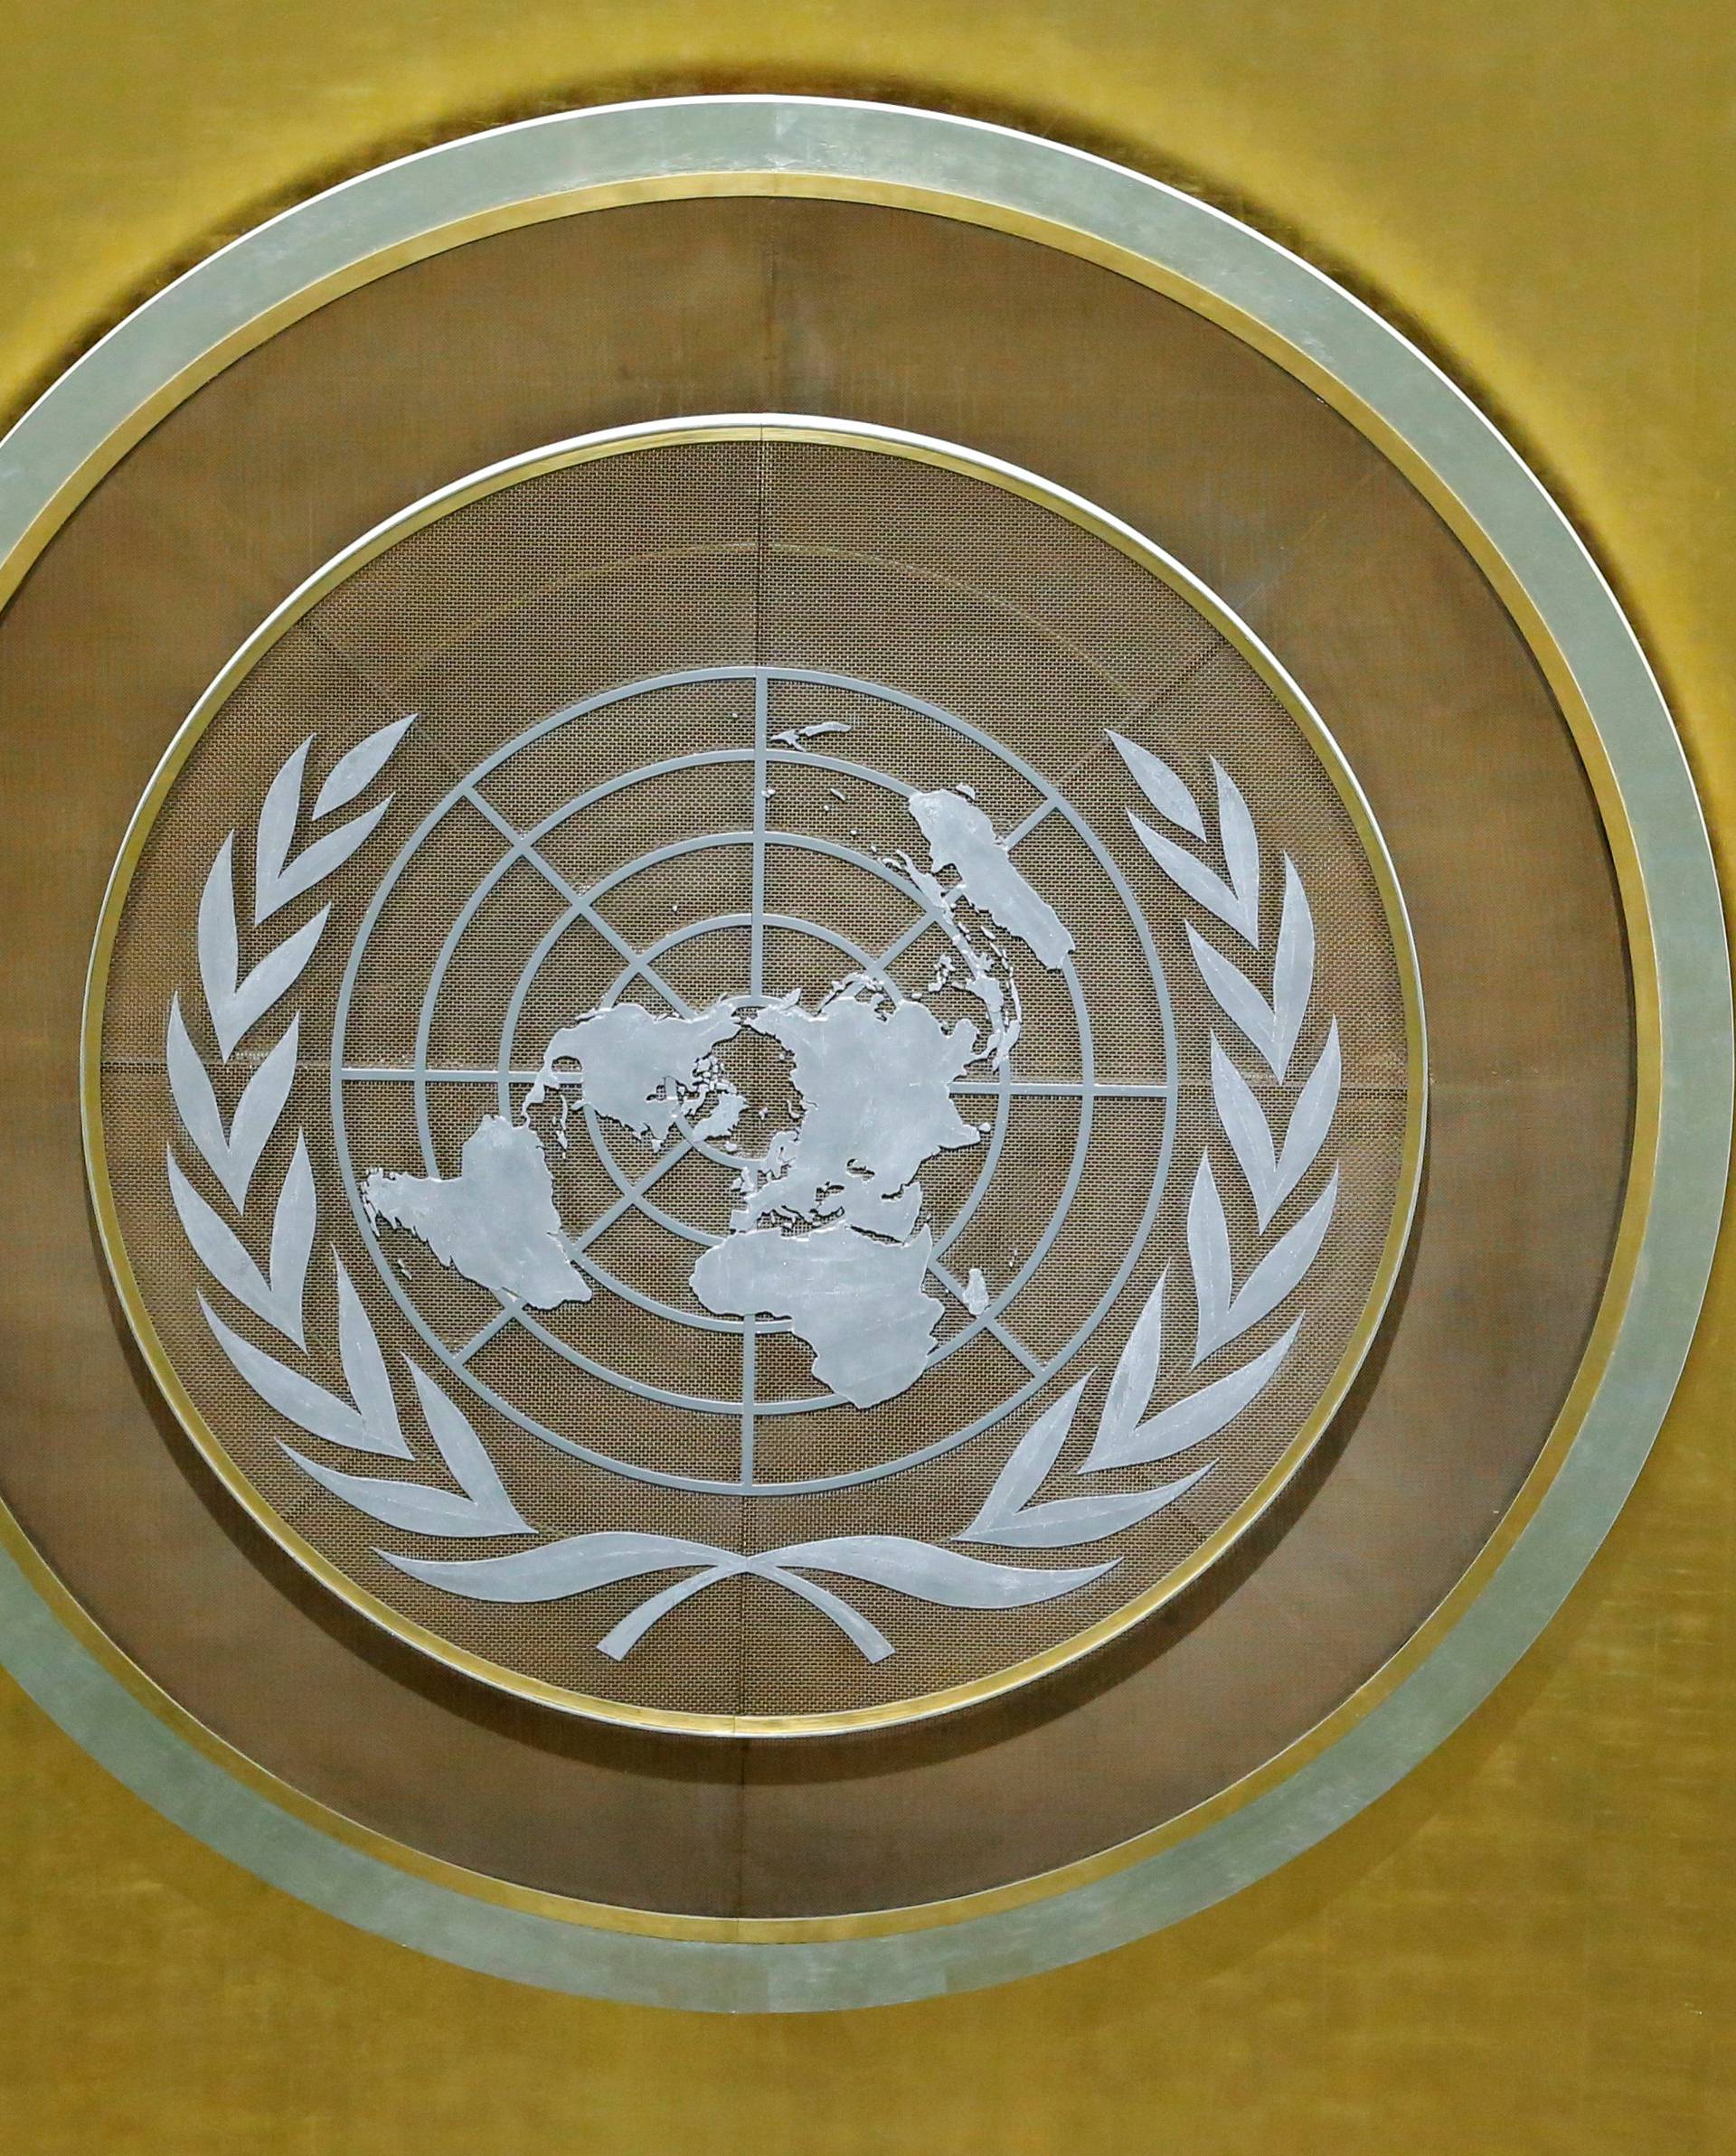 FILE PHOTO: The United Nations logo is seen in the U.N. General Assembly hall at U.N. headquarters in New York